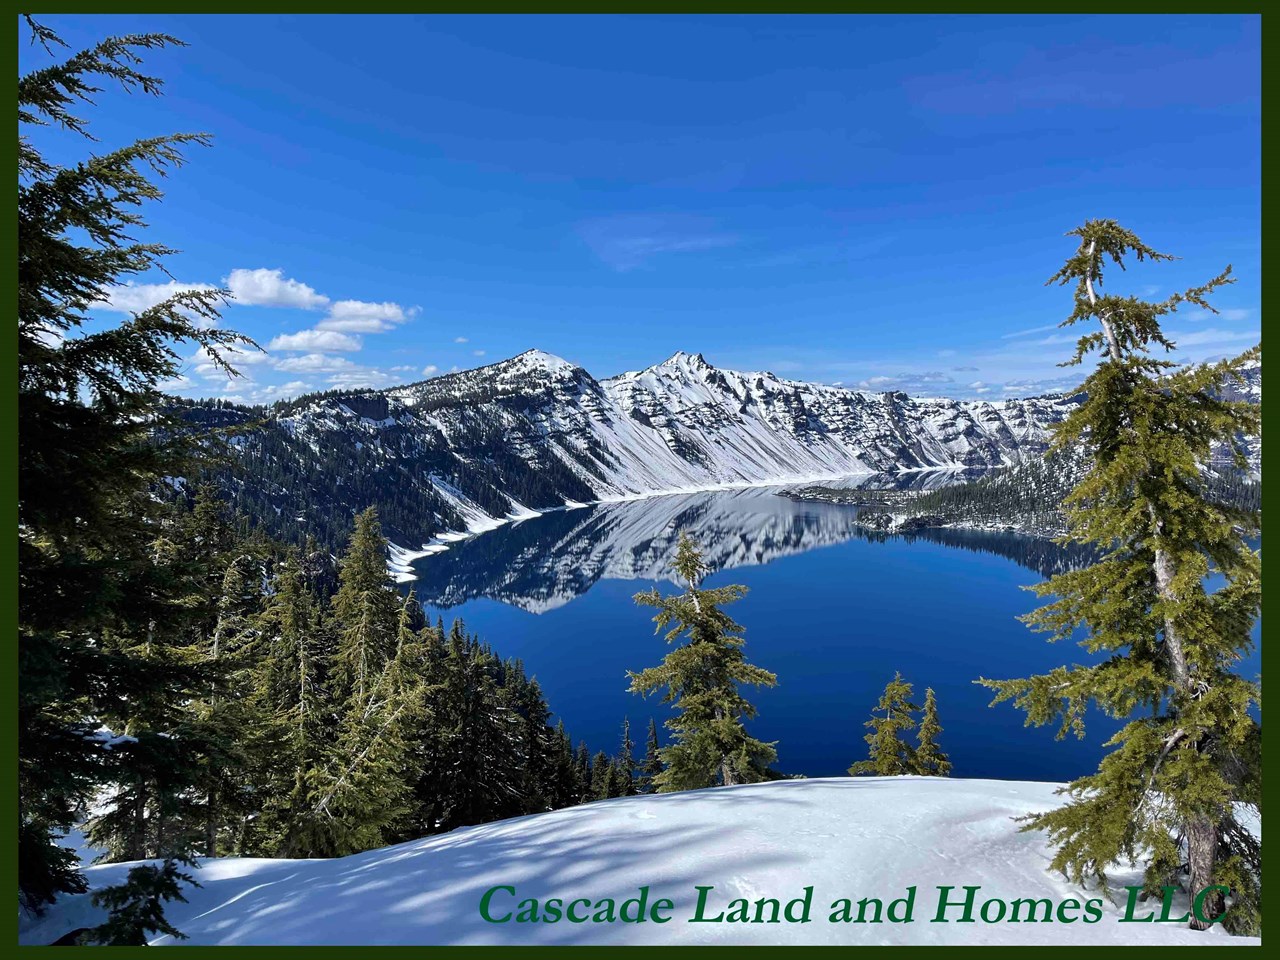 crater lake national park is just 40 miles away and is oregon’s only national park! crater lake is fed from rain and snow melt and is amazingly clear. at 1,949 feet deep, it is the deepest lake in the nation and is absolutely breathtaking! the entire park is unbelievably beautiful!